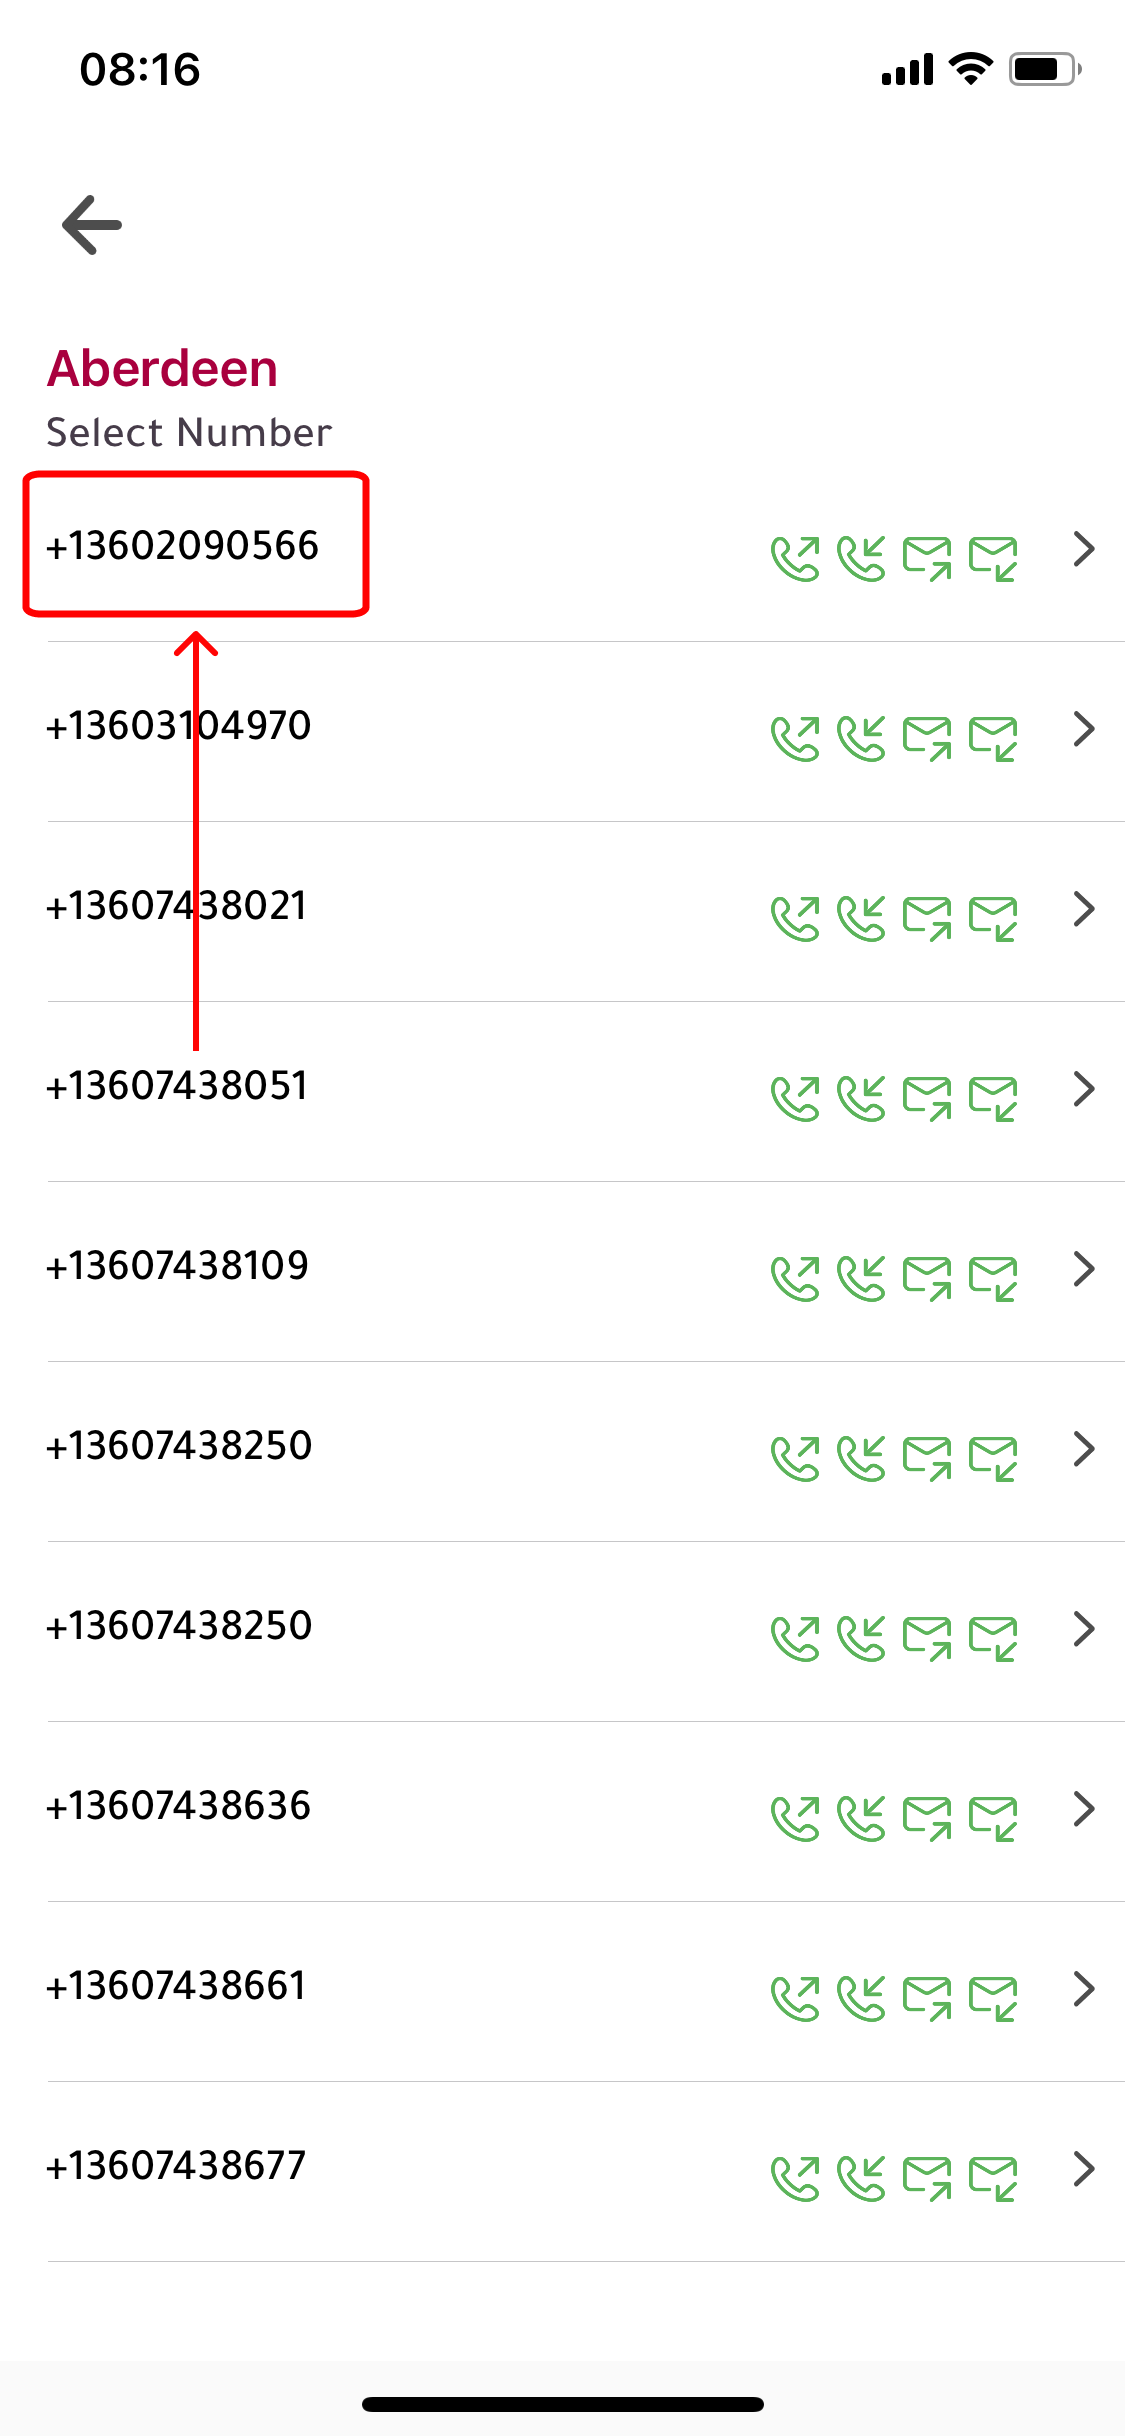 How to Use Telegram Without a Number?